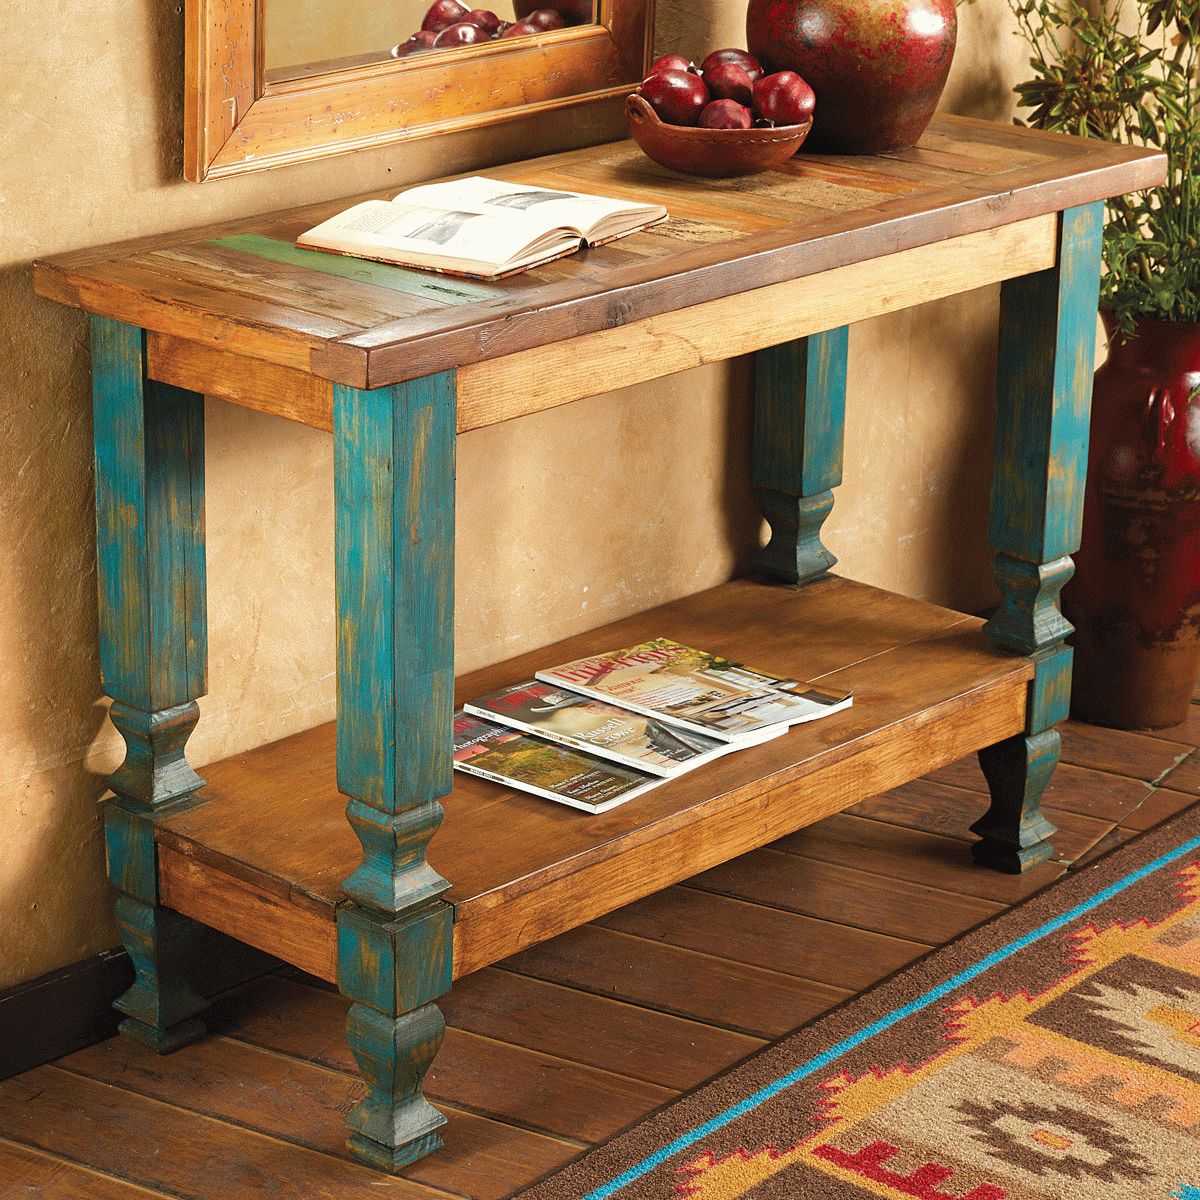 Western Furniture: Old Wood Turquoise Console Table|lone Within Antique Blue Wood And Gold Console Tables (View 4 of 20)